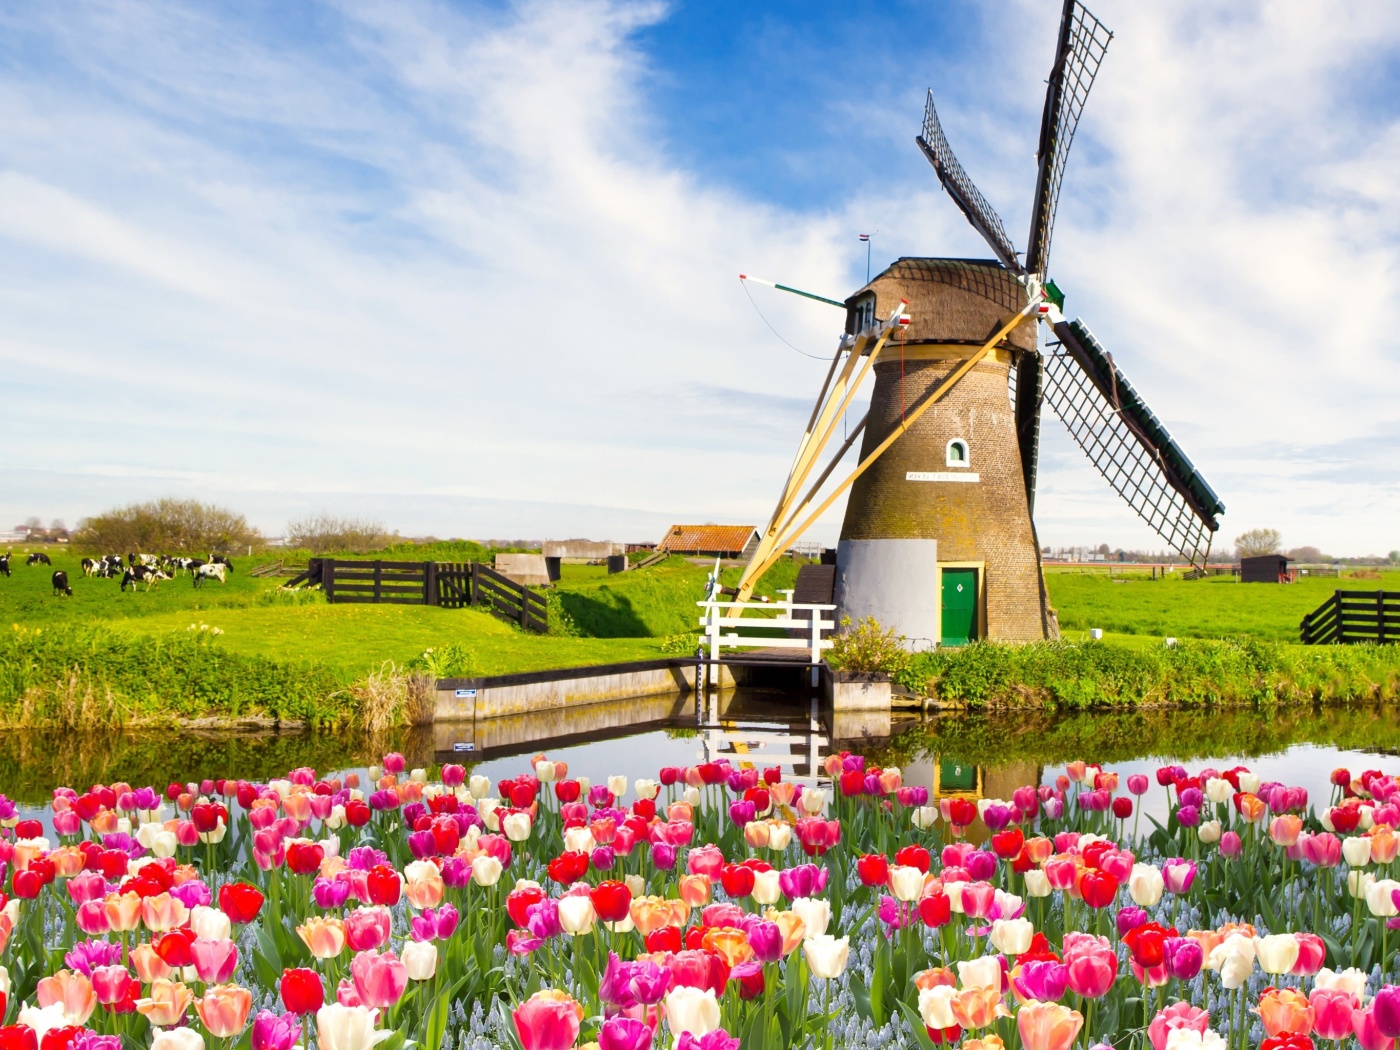 Mill and tulips in Holland screenshot #1 1400x1050